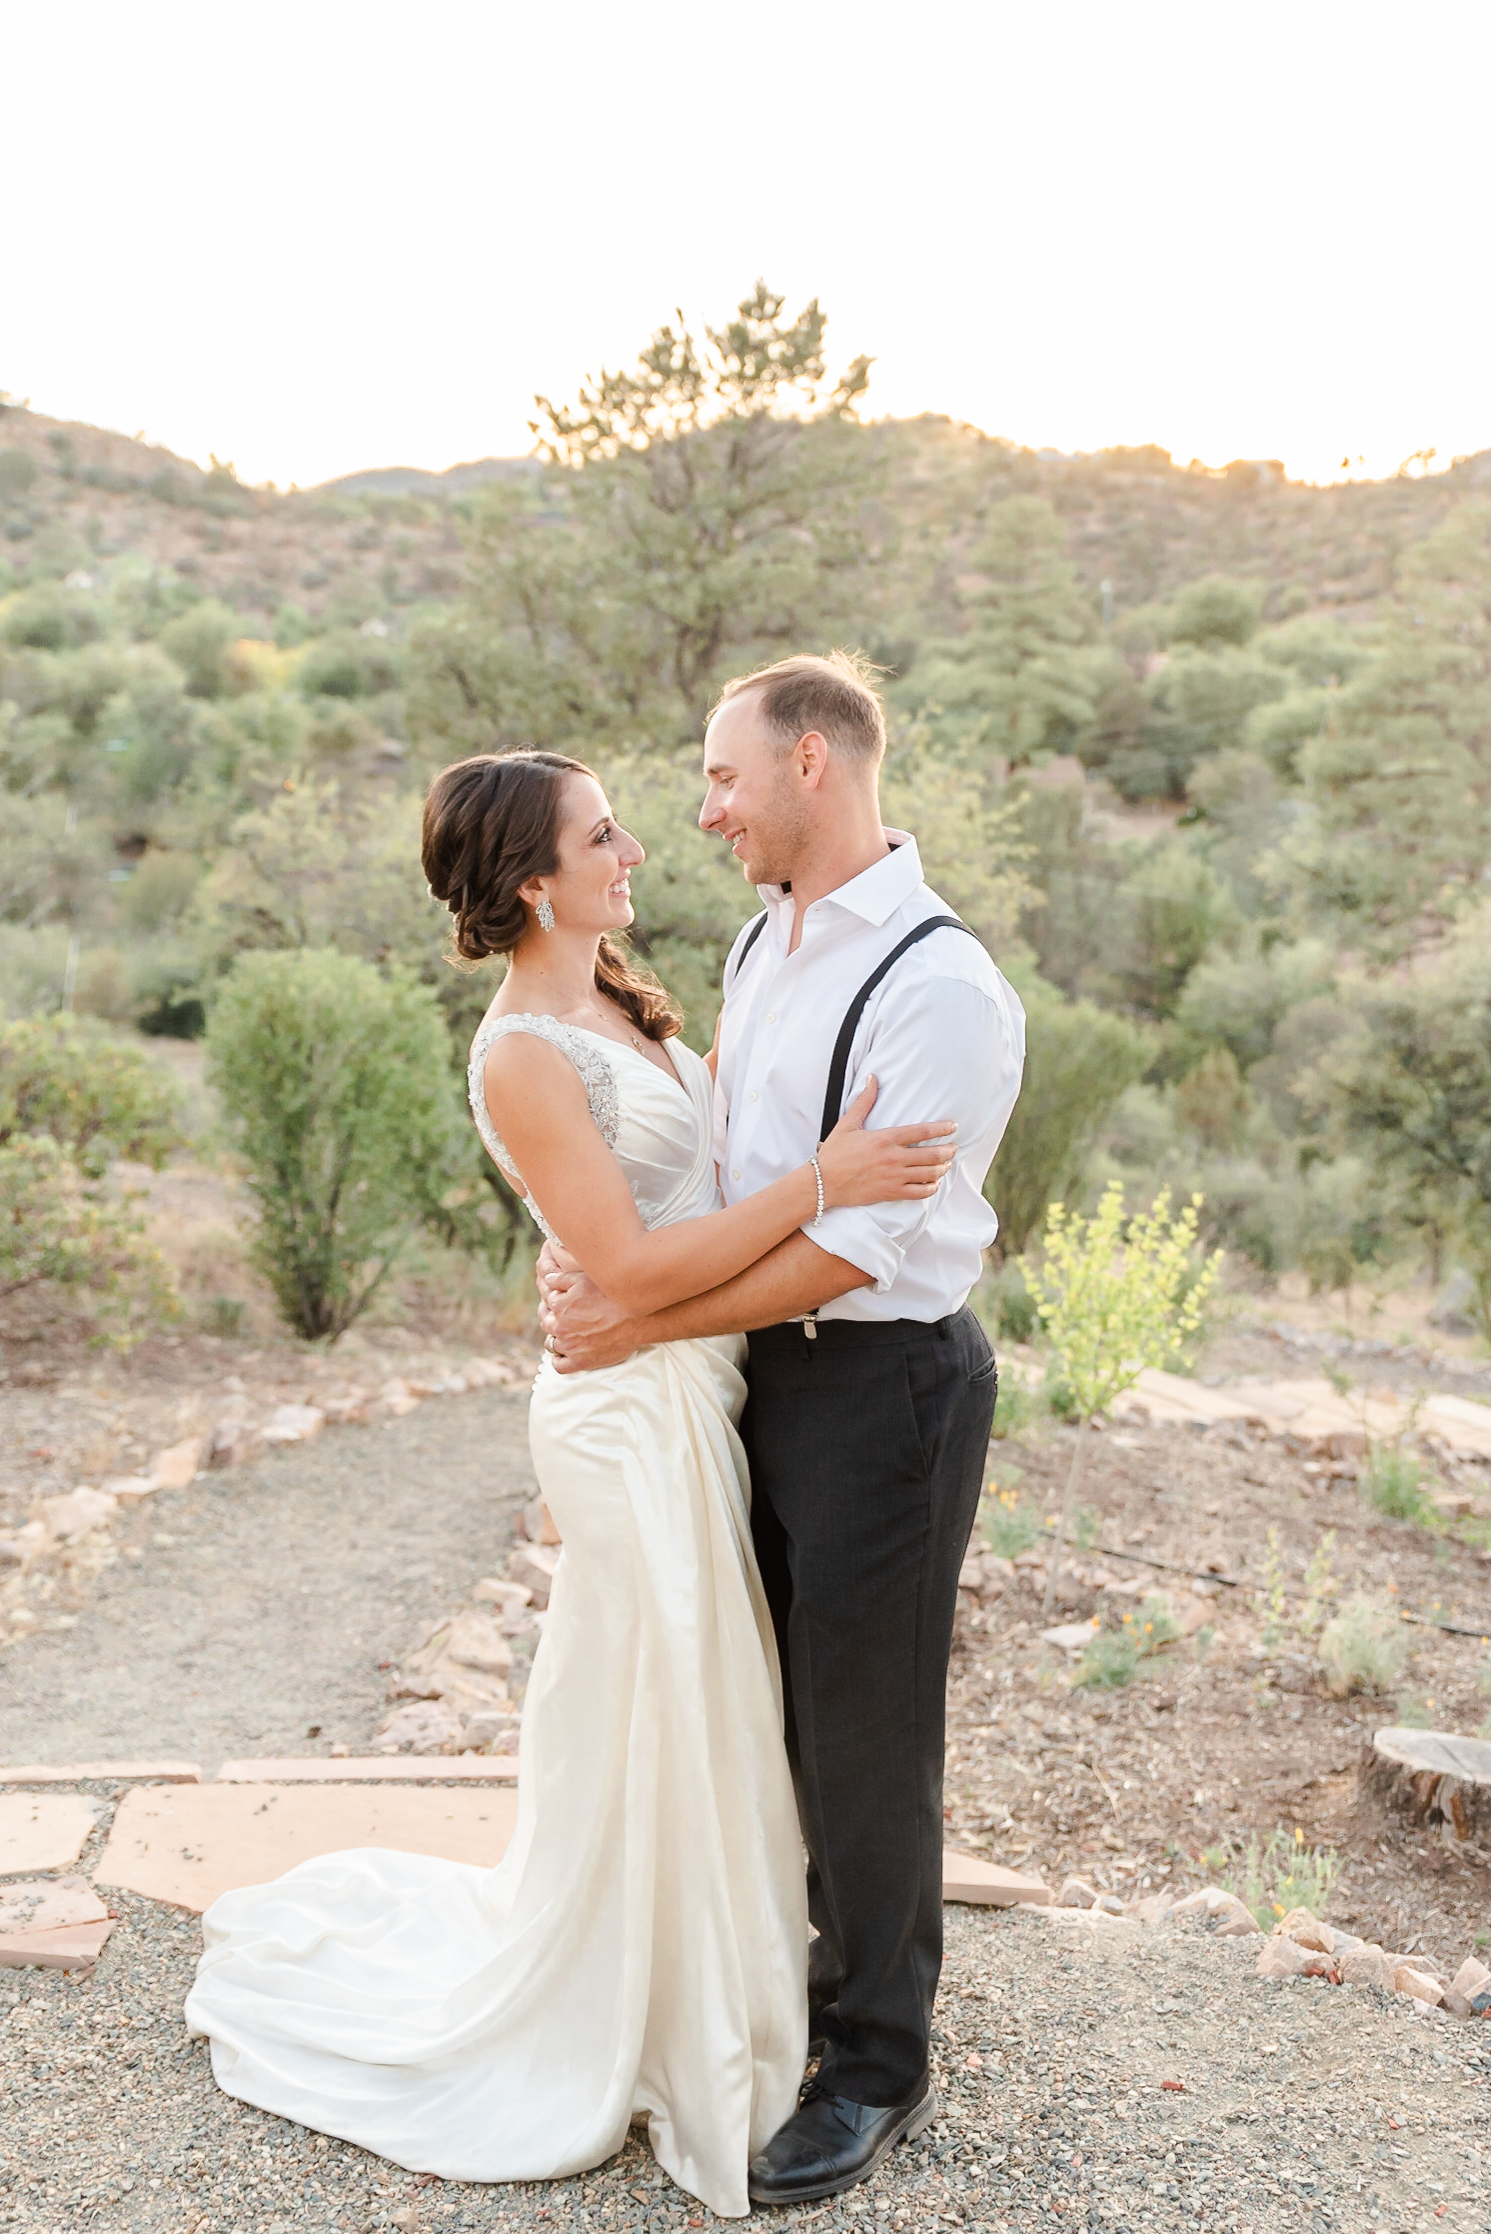 man in suit and woman in white wedding dress embracing each other during sunset on a hill